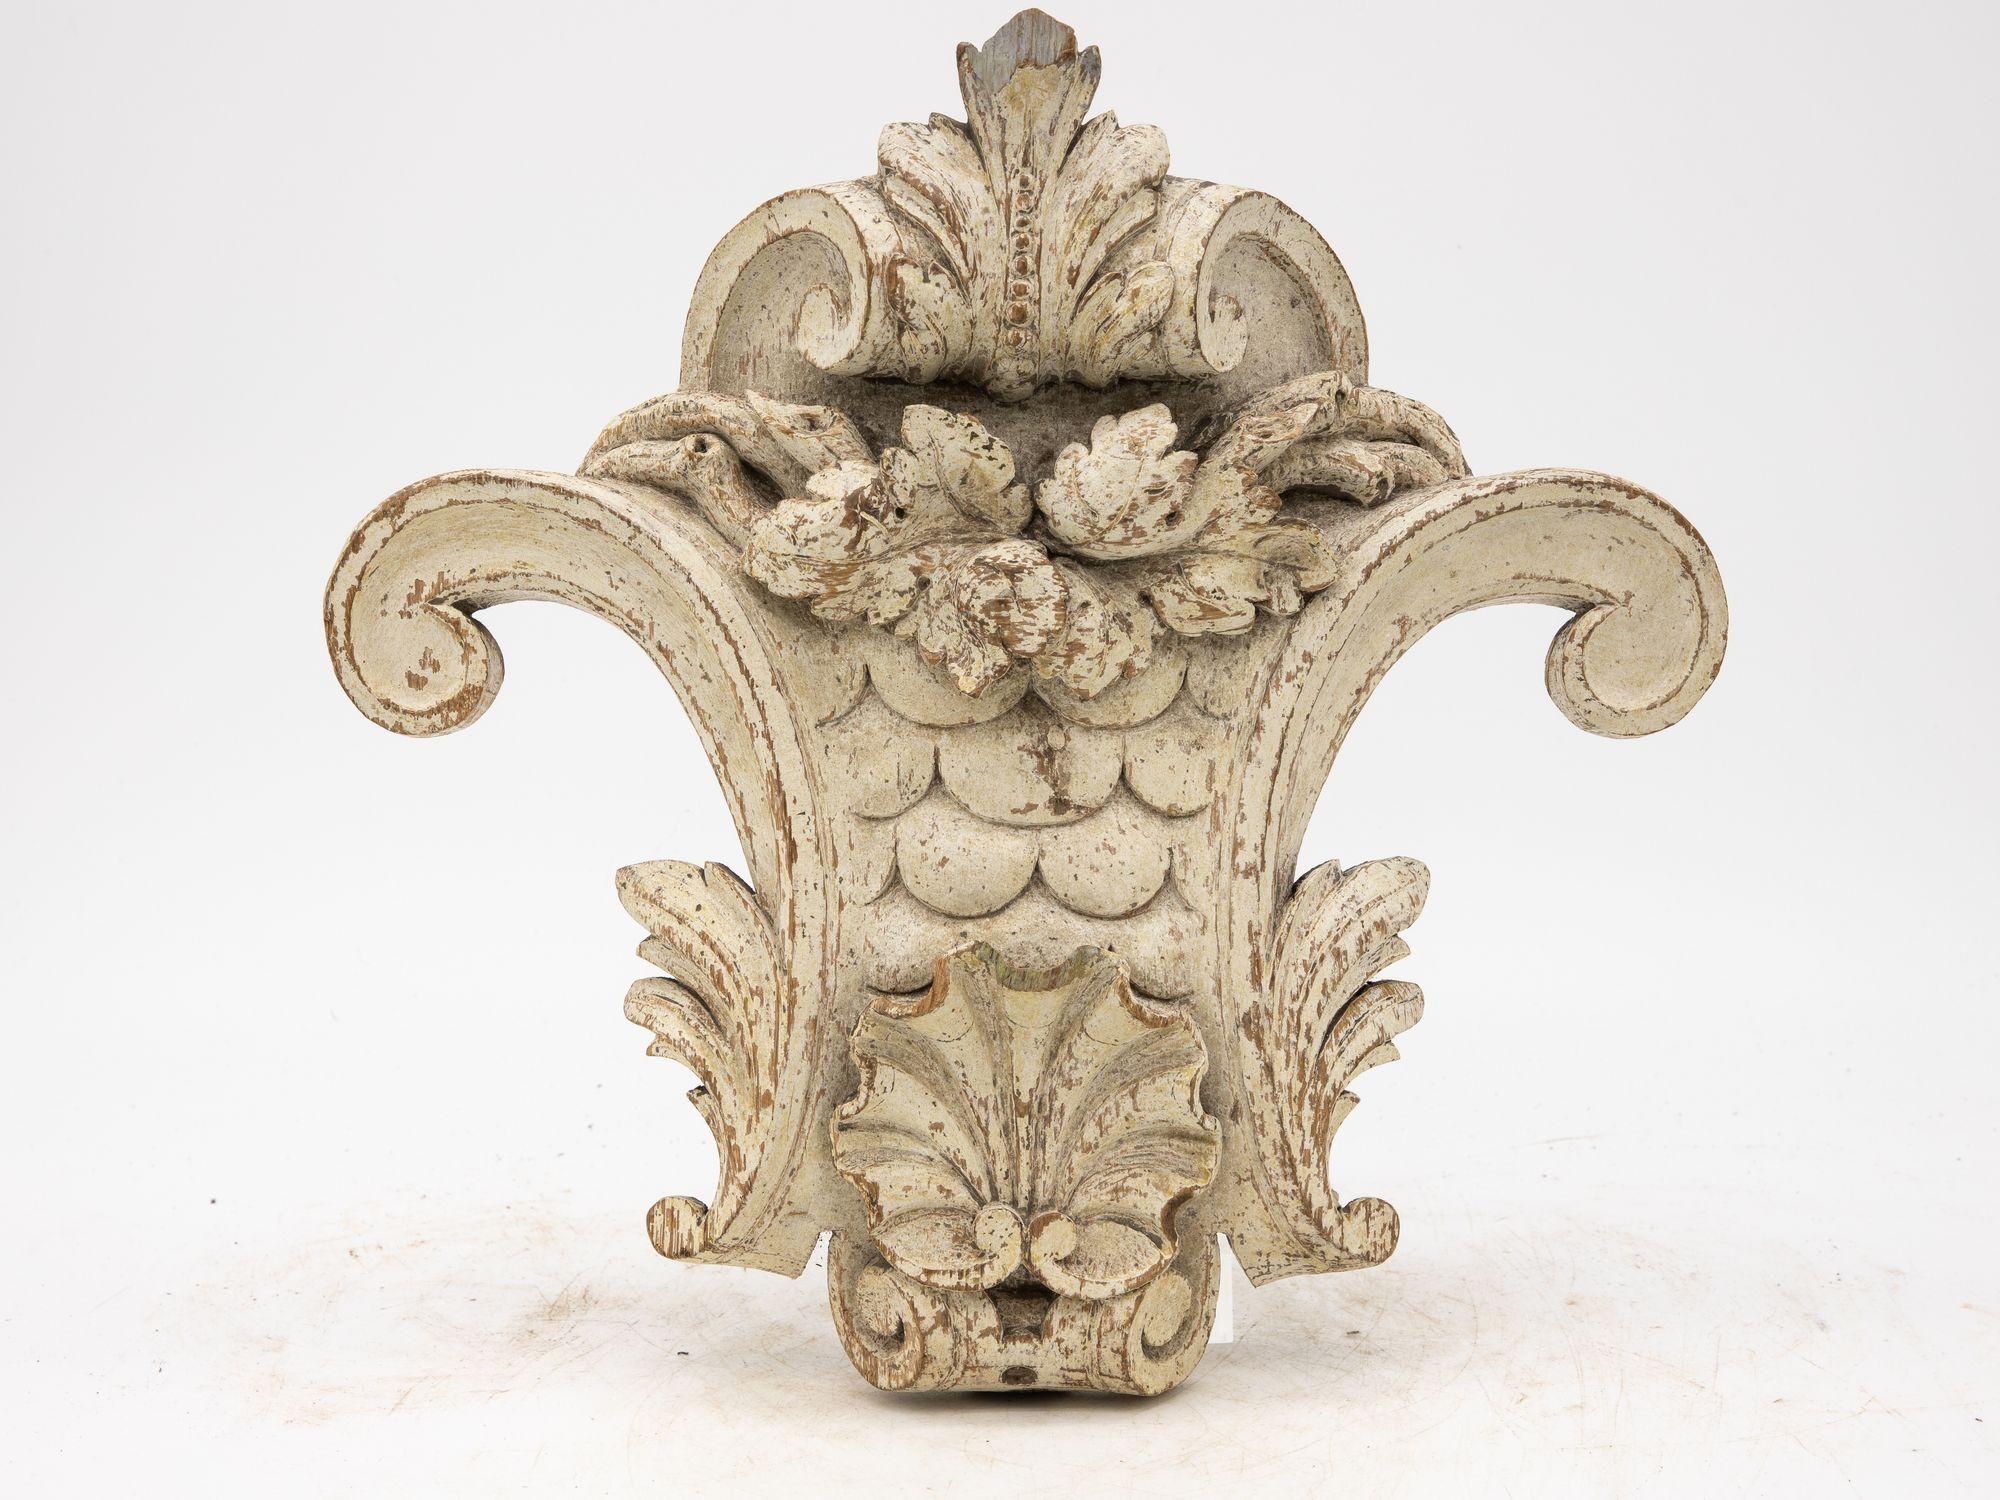 A captivating pair of 19th-century woodwork corbels invites admiration with their rustic charm. These exquisite architectural elements bear witness to the craftsmanship of the era, each intricately carved. The weathered paint finish adds character,